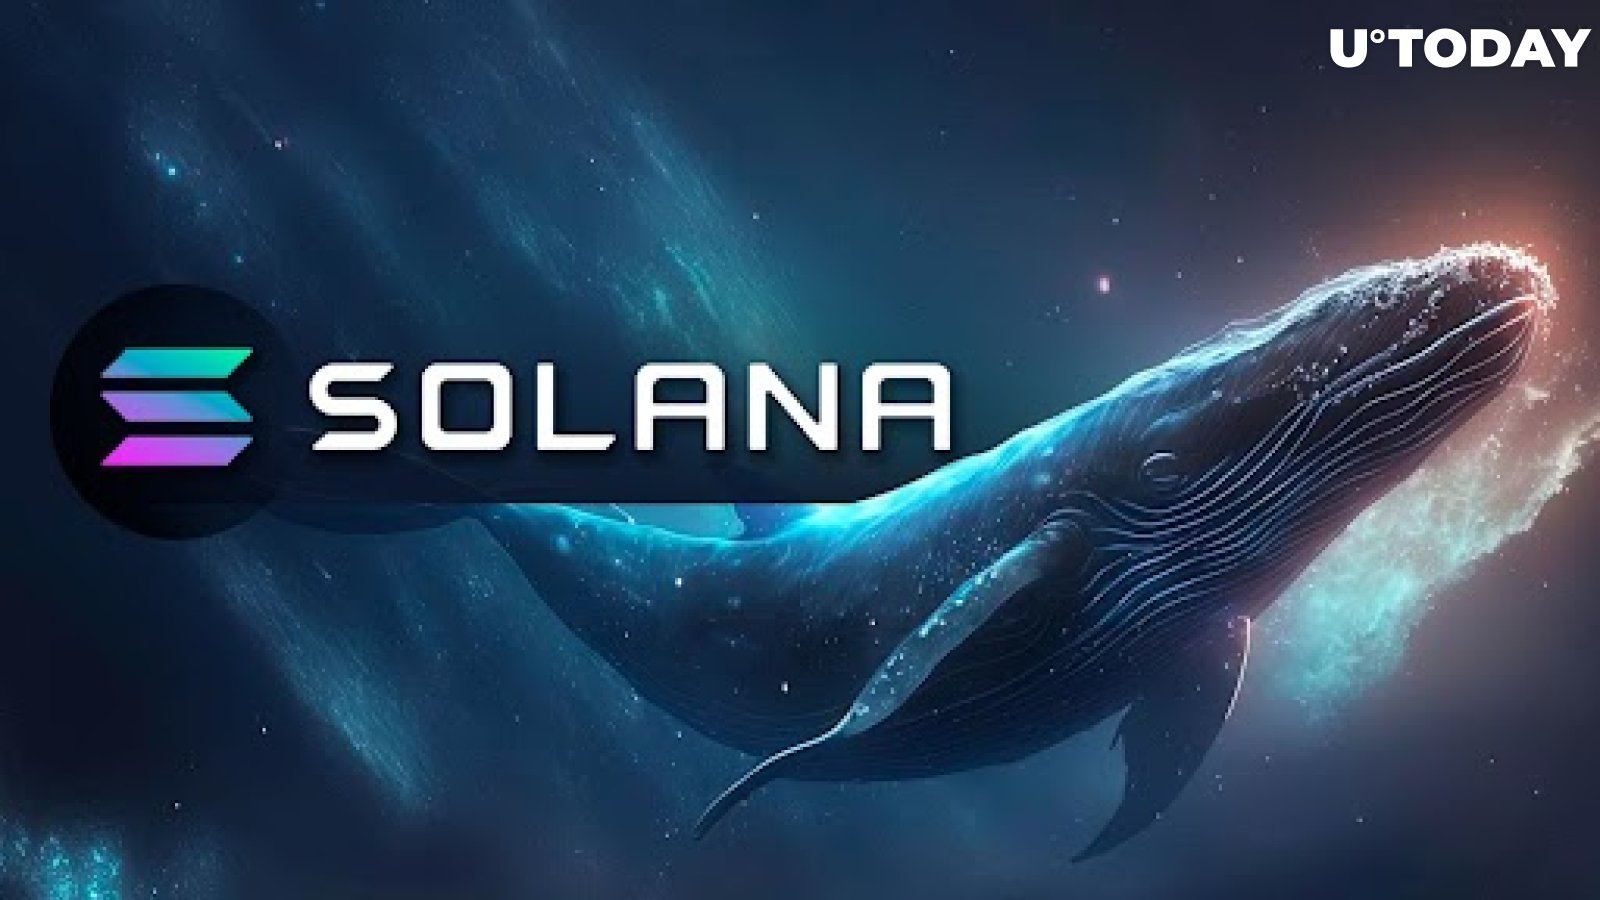 Solana (SOL) Risks Sell-off as Whale Makes Daring Move